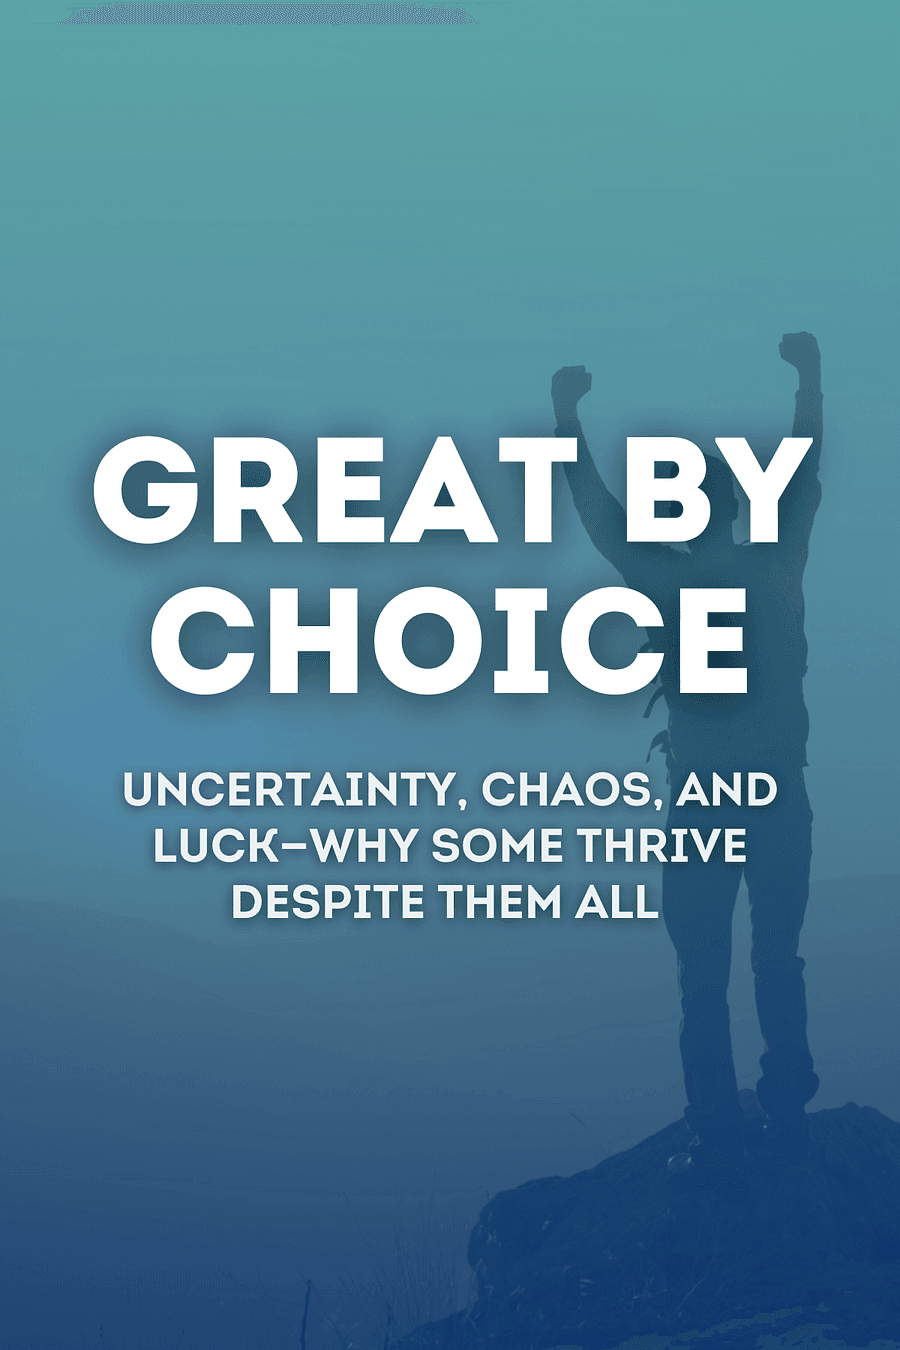 Great by Choice by Jim Collins, Morten T. Hansen - Book Summary